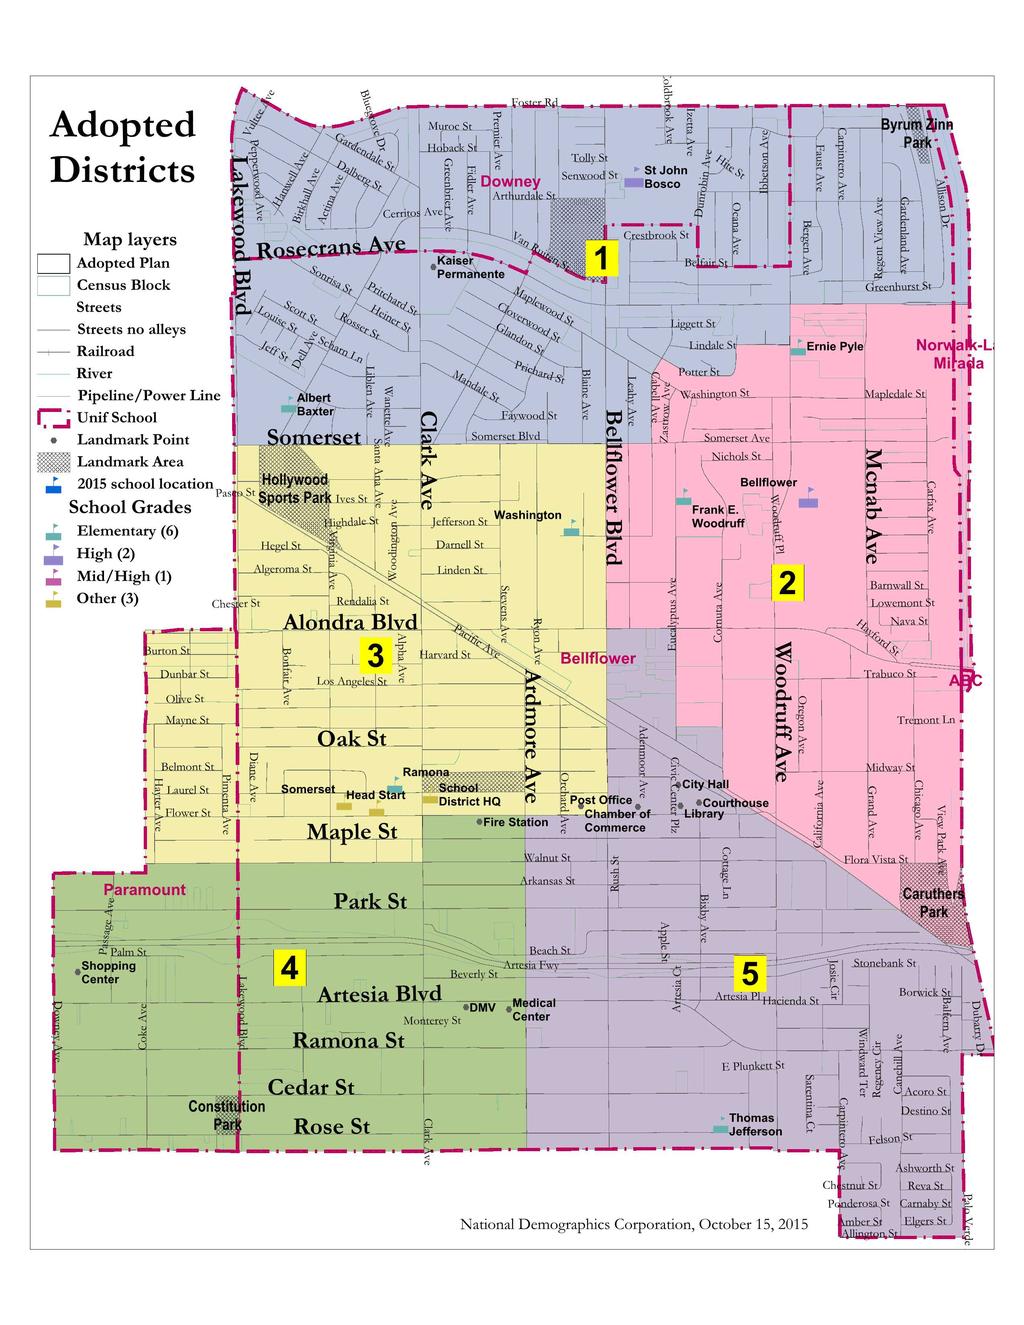 Adopted Districts Map layers Adopted Plan Census Block Streets Streets no alleys Railroad River Pipeline/ Power Line 7J Unif School Landmark Point Landmark Area i 2015 school location School Grades